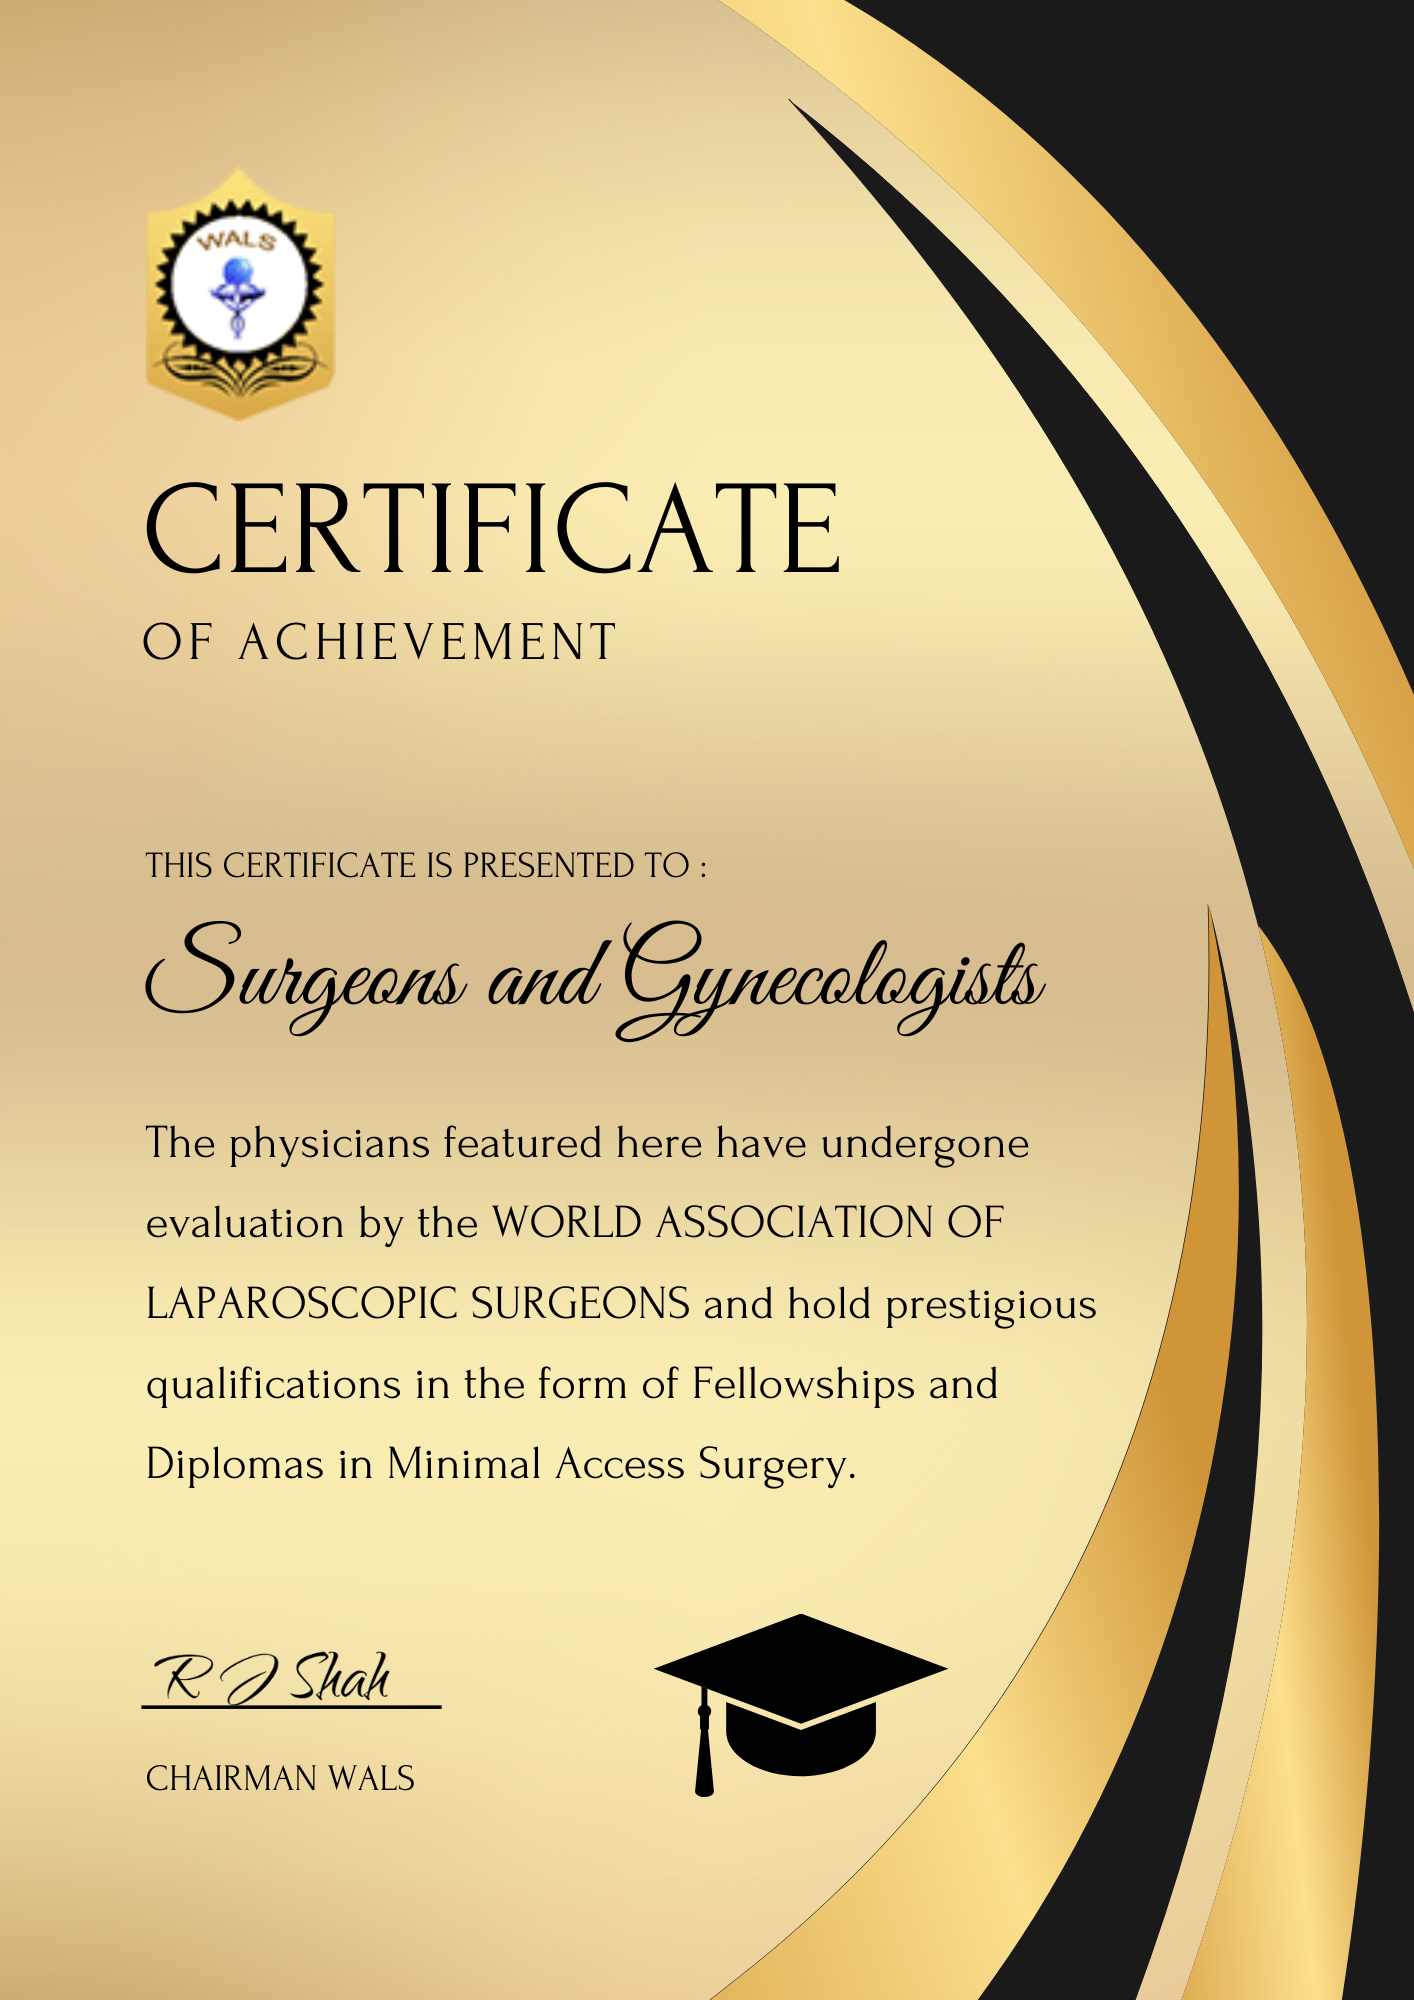 Laparoscopic Surgeons Endorsed by WALS